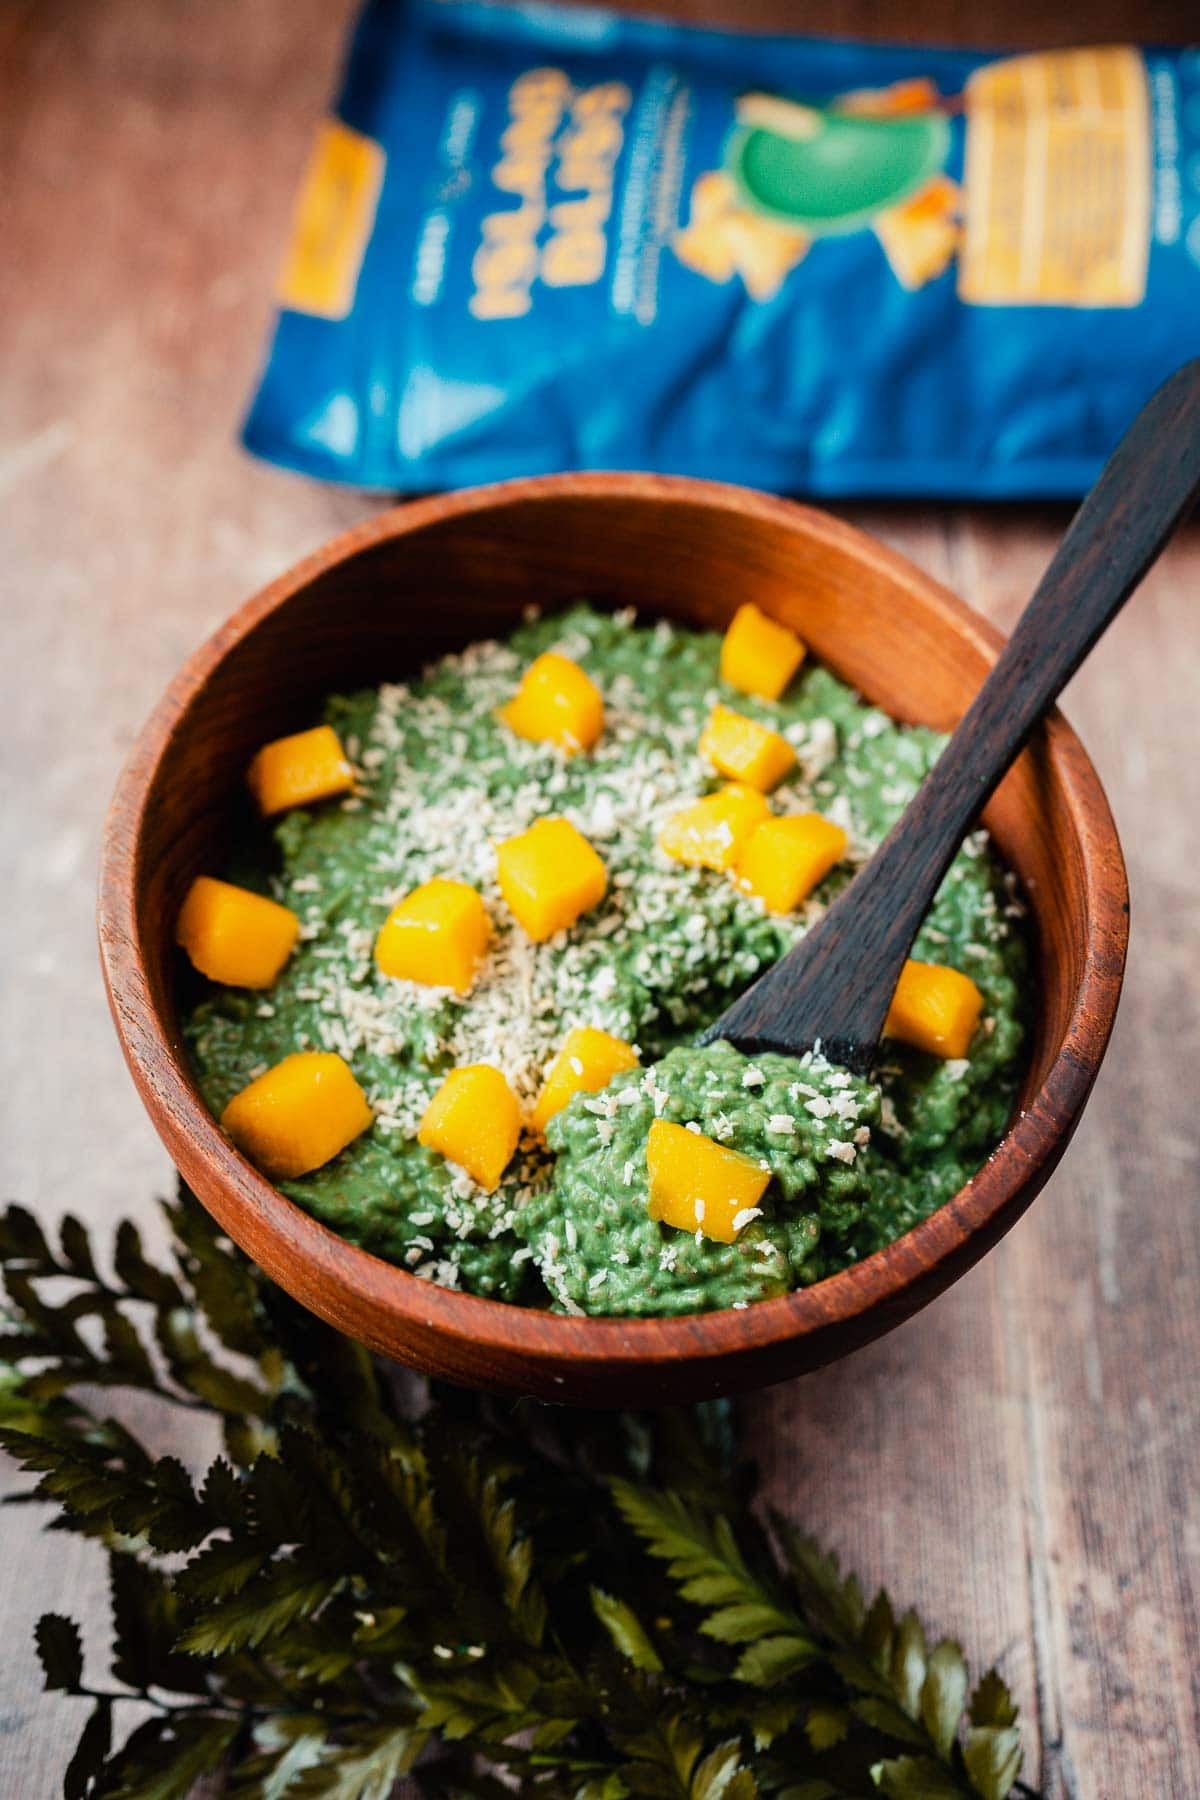 A wooden spoon sticking out of a wooden bowl of green tropical chia pudding.